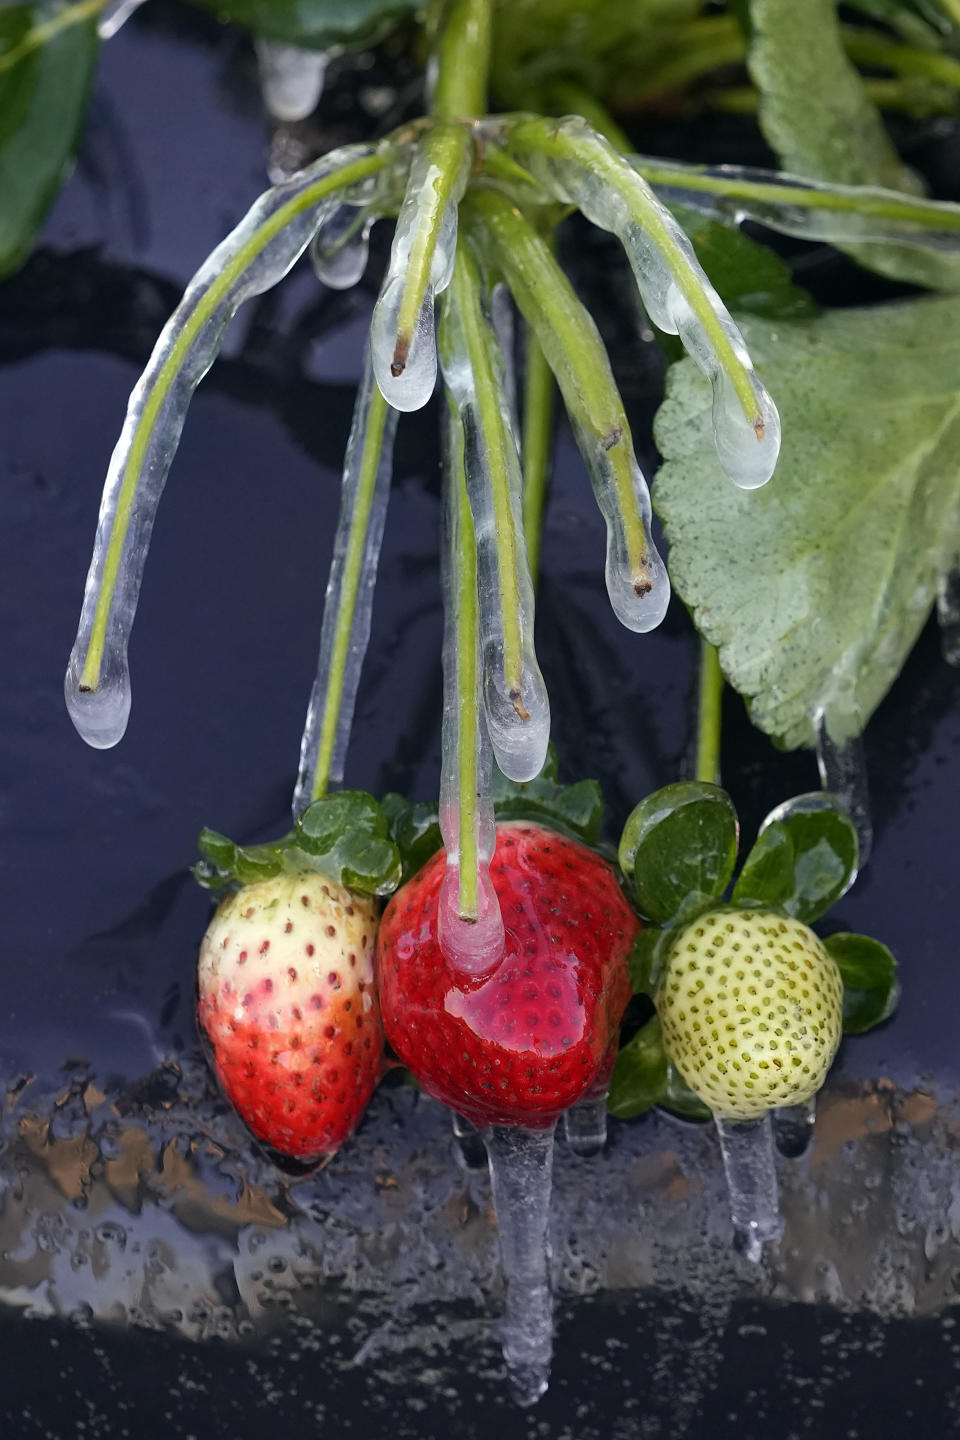 Icicles cling to strawberry plants at a field Saturday, Dec. 24, 2022, in Plant City, Fla. Farmers spray their crops with sprinklers to help protect them from the damaging freeze. Temperatures overnight in the area dipped into the mid-20's. (AP Photo/Chris O'Meara)